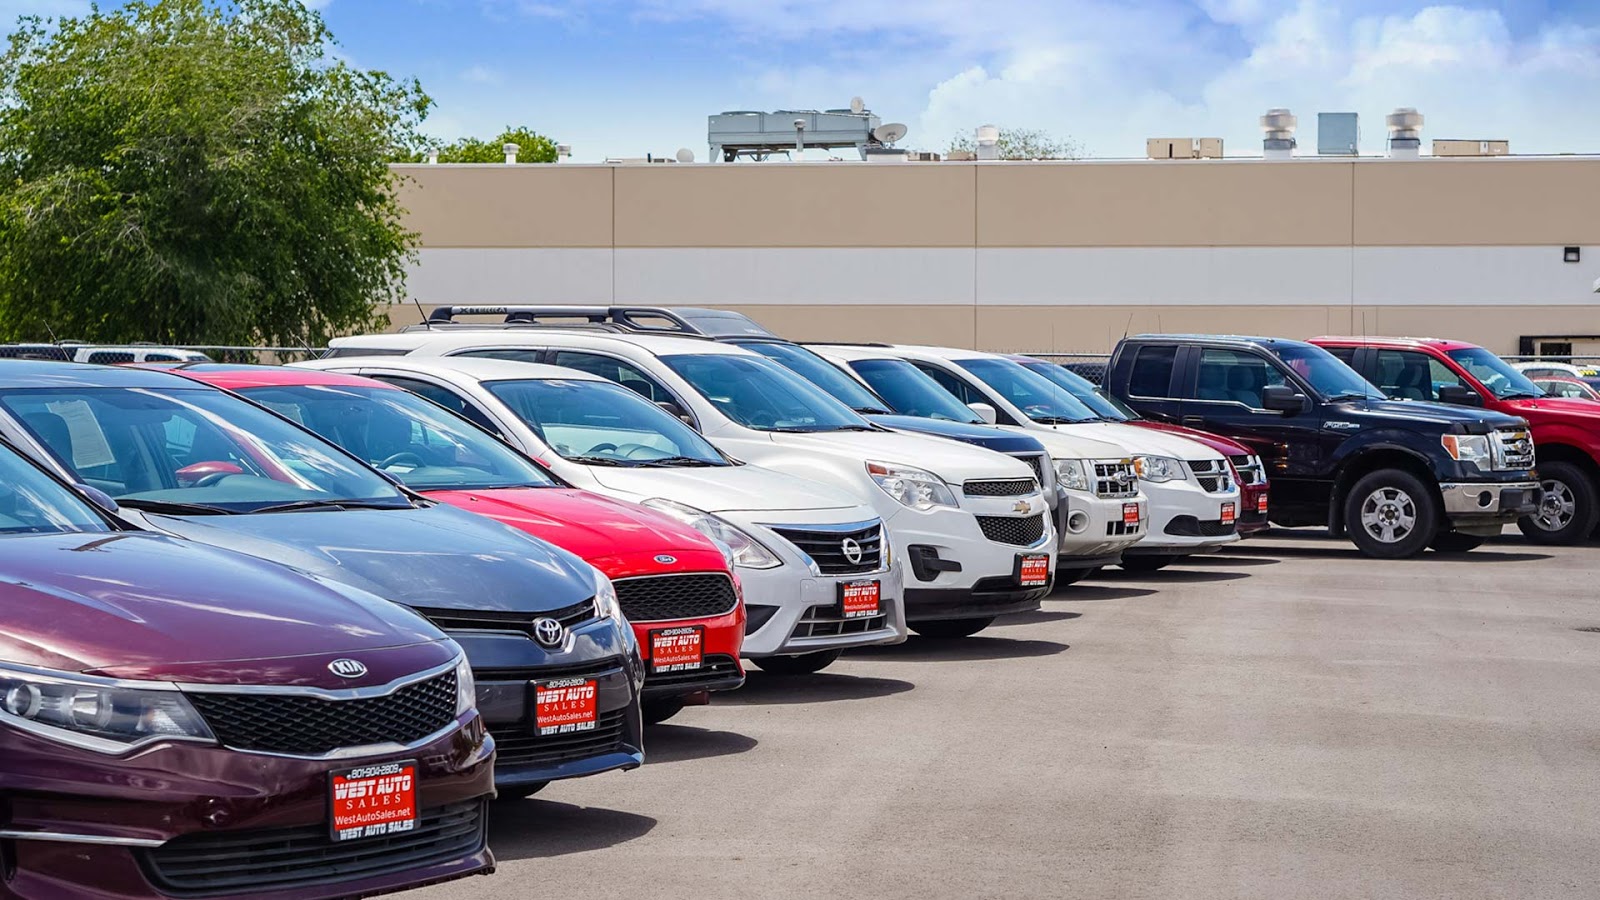 The 8 best used car dealerships in Philly - CoPilot